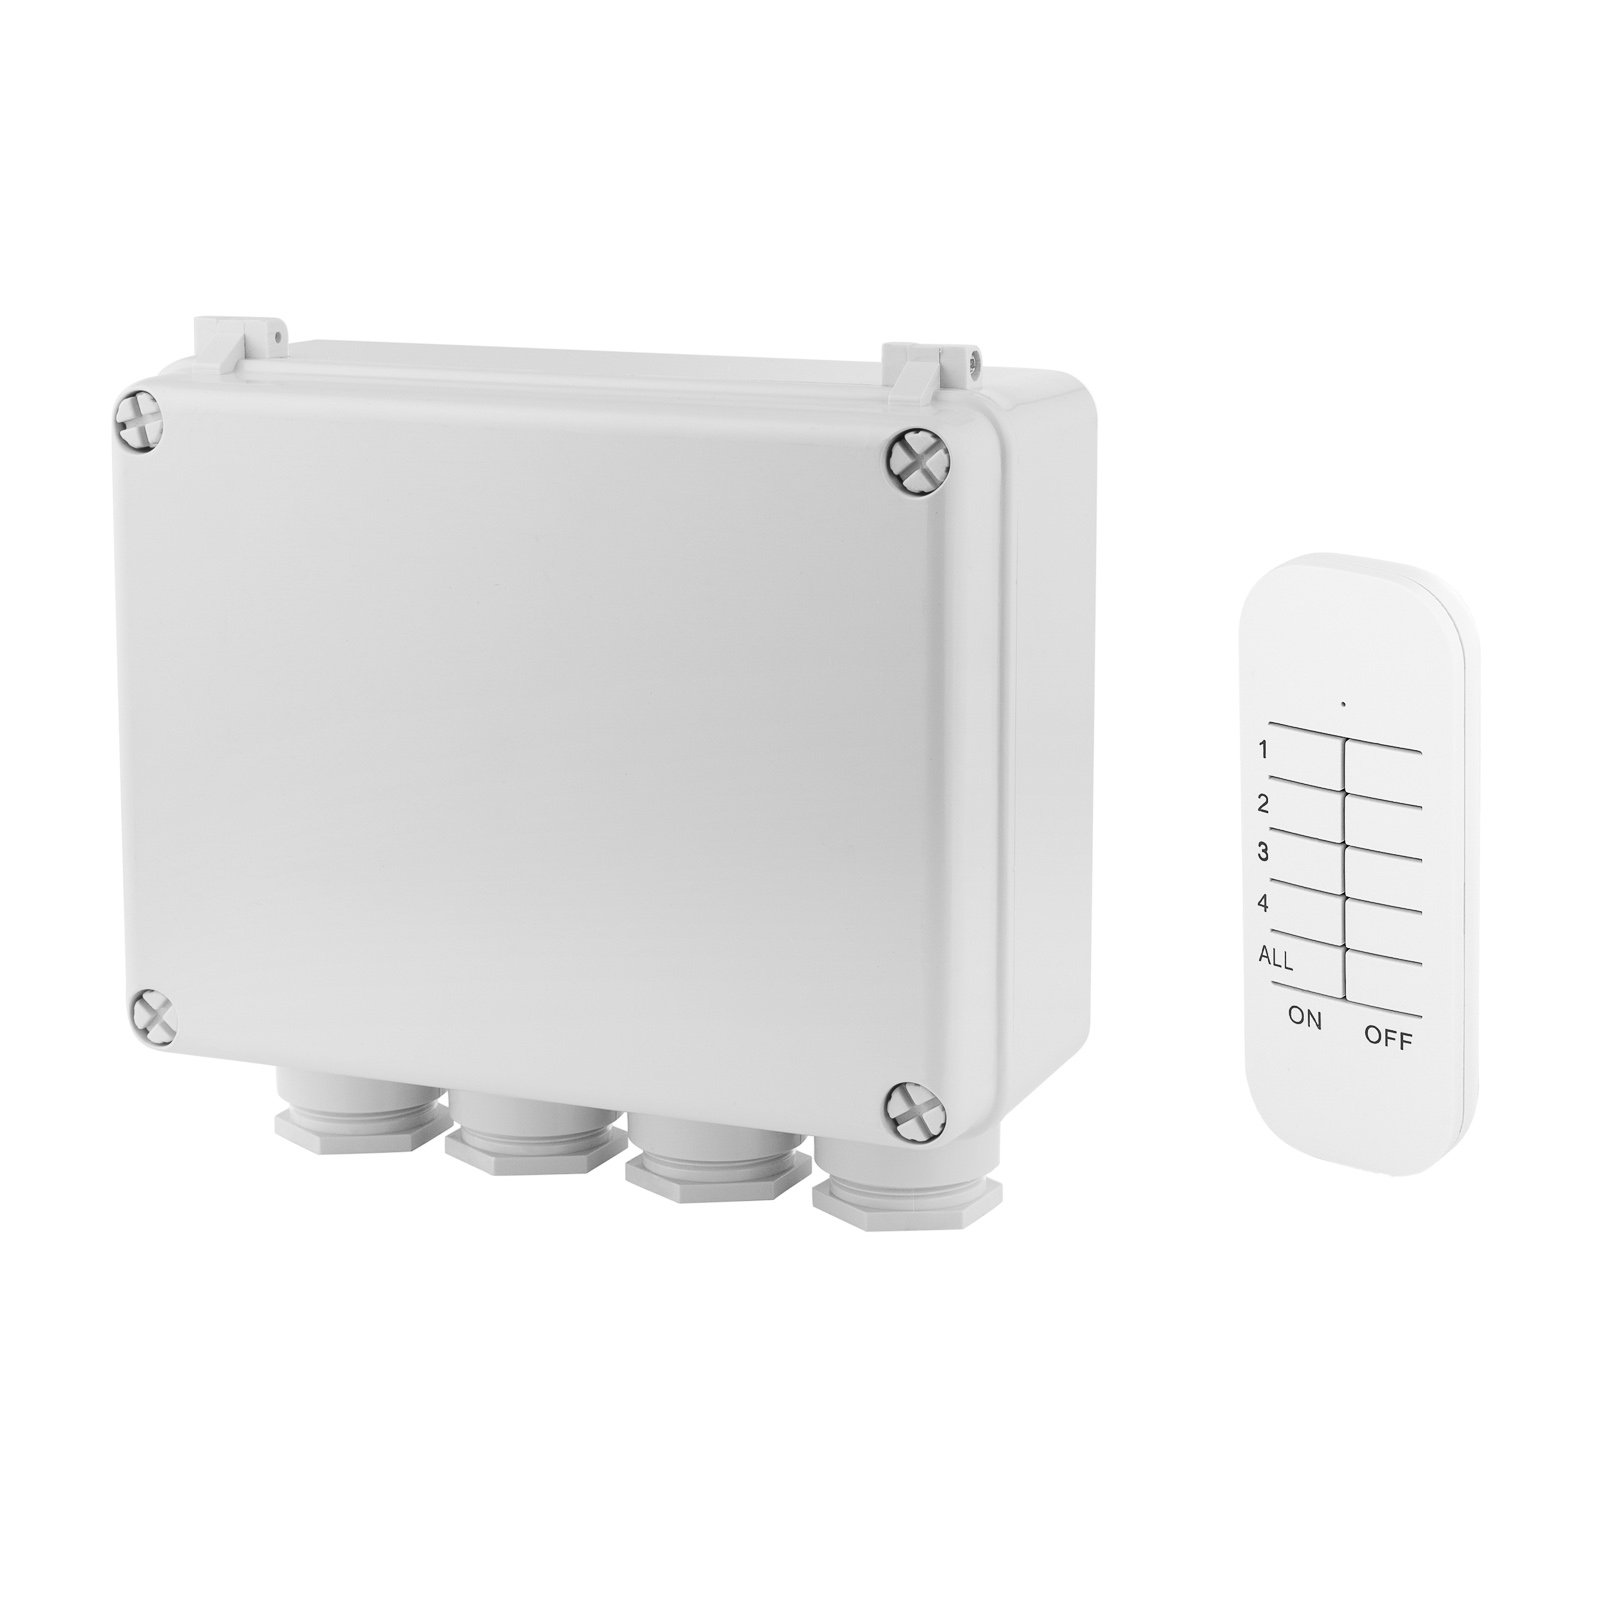 3-channel switch box SH4-99652, outdoor area